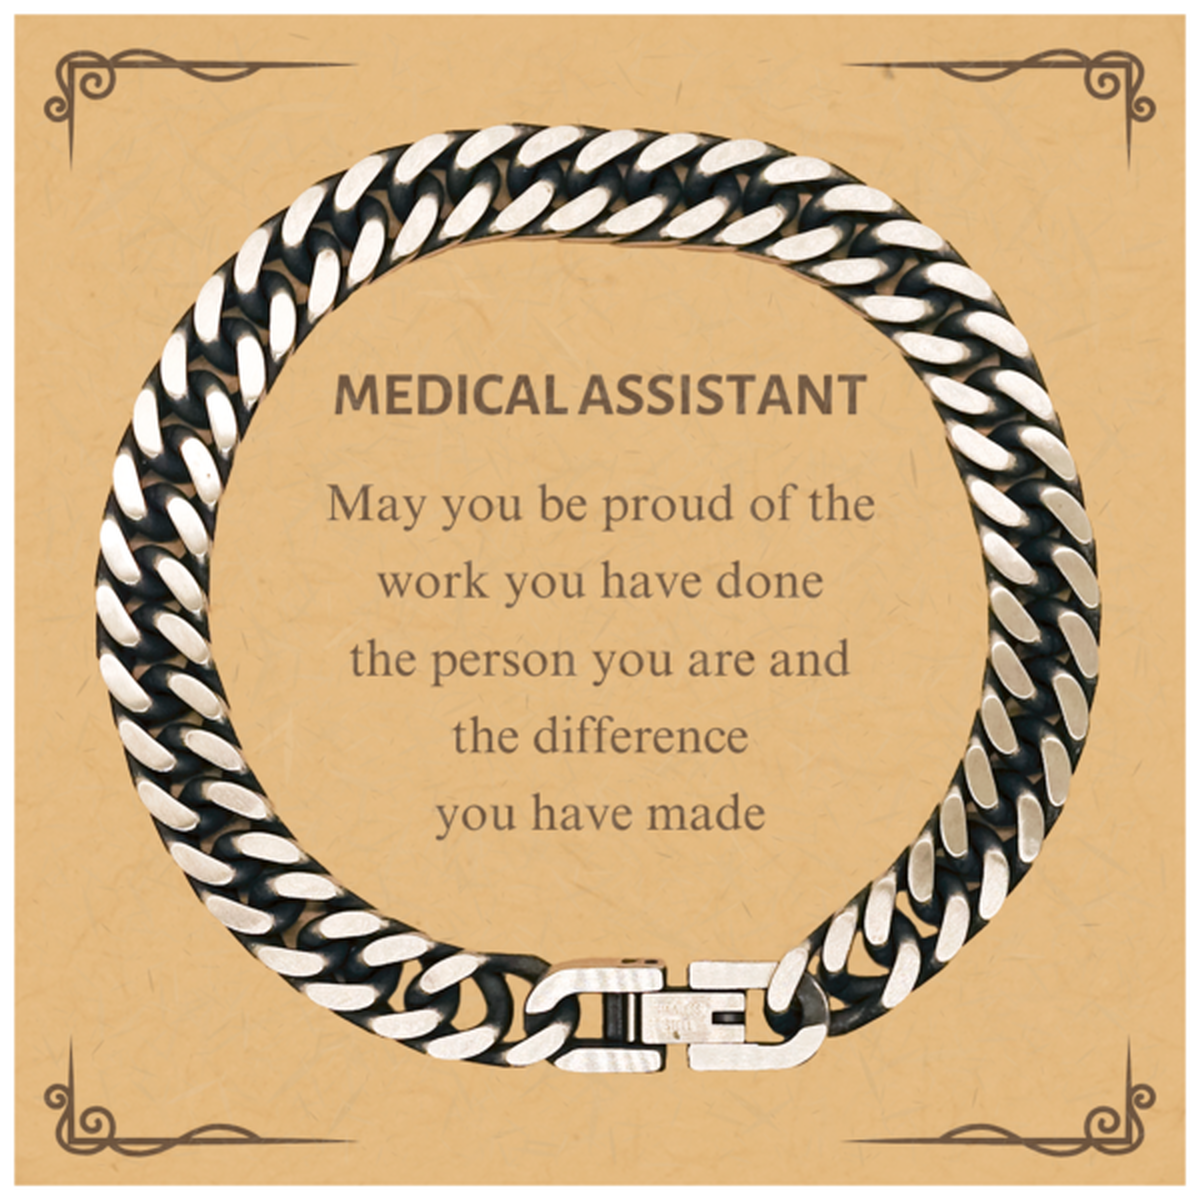 Medical Assistant May you be proud of the work you have done, Retirement Medical Assistant Cuban Link Chain Bracelet for Colleague Appreciation Gifts Amazing for Medical Assistant